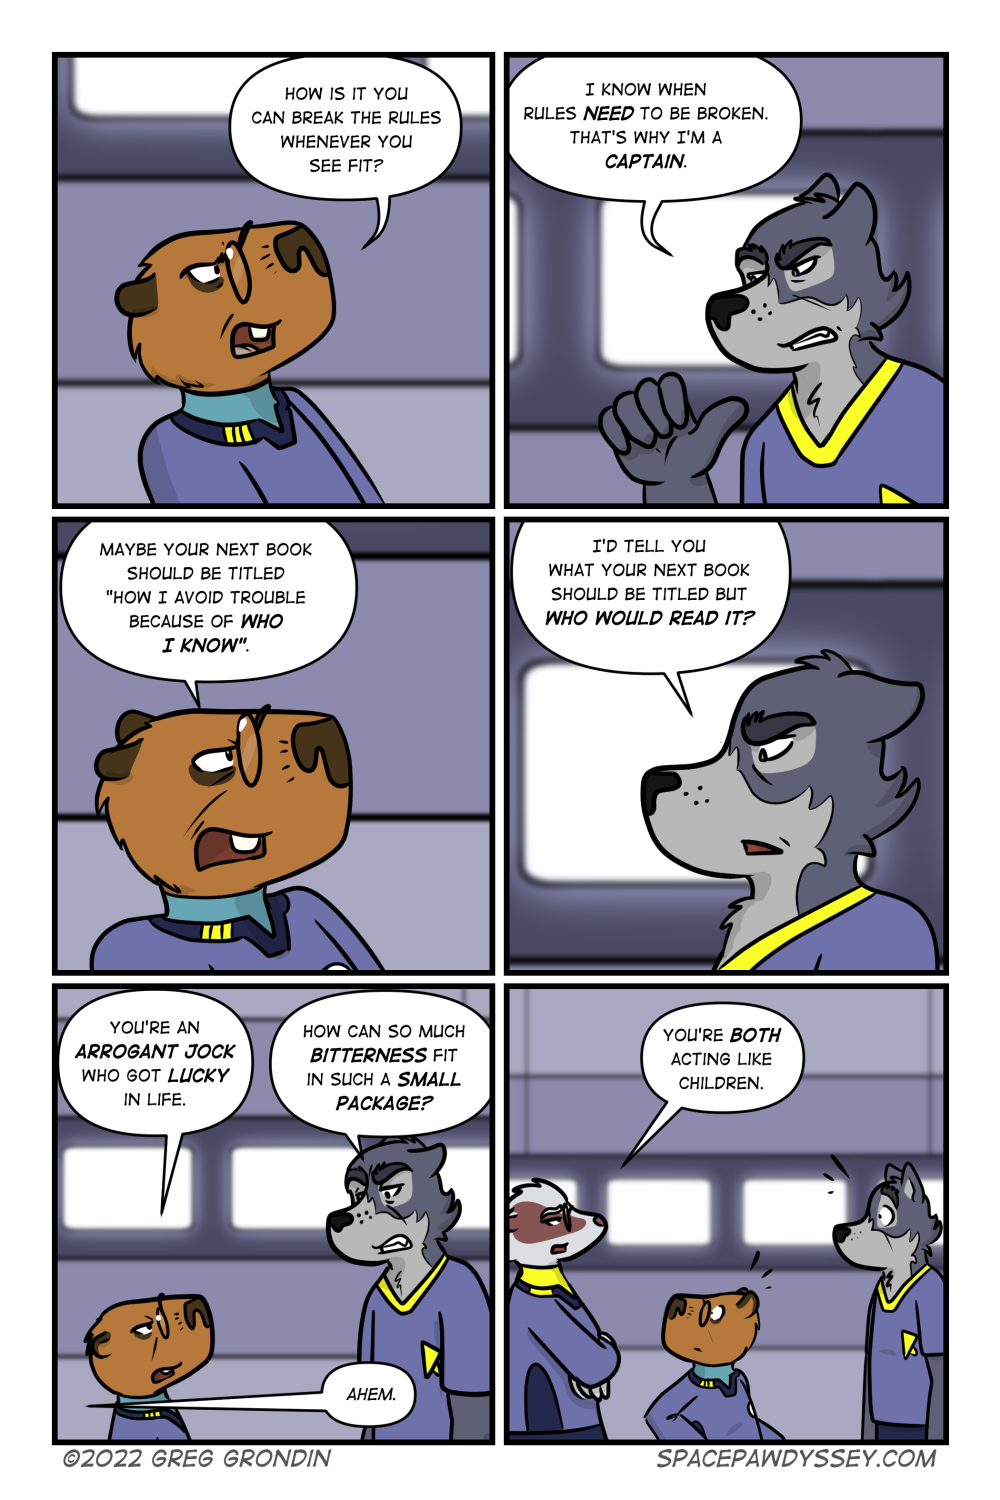 Space Pawdyssey #566